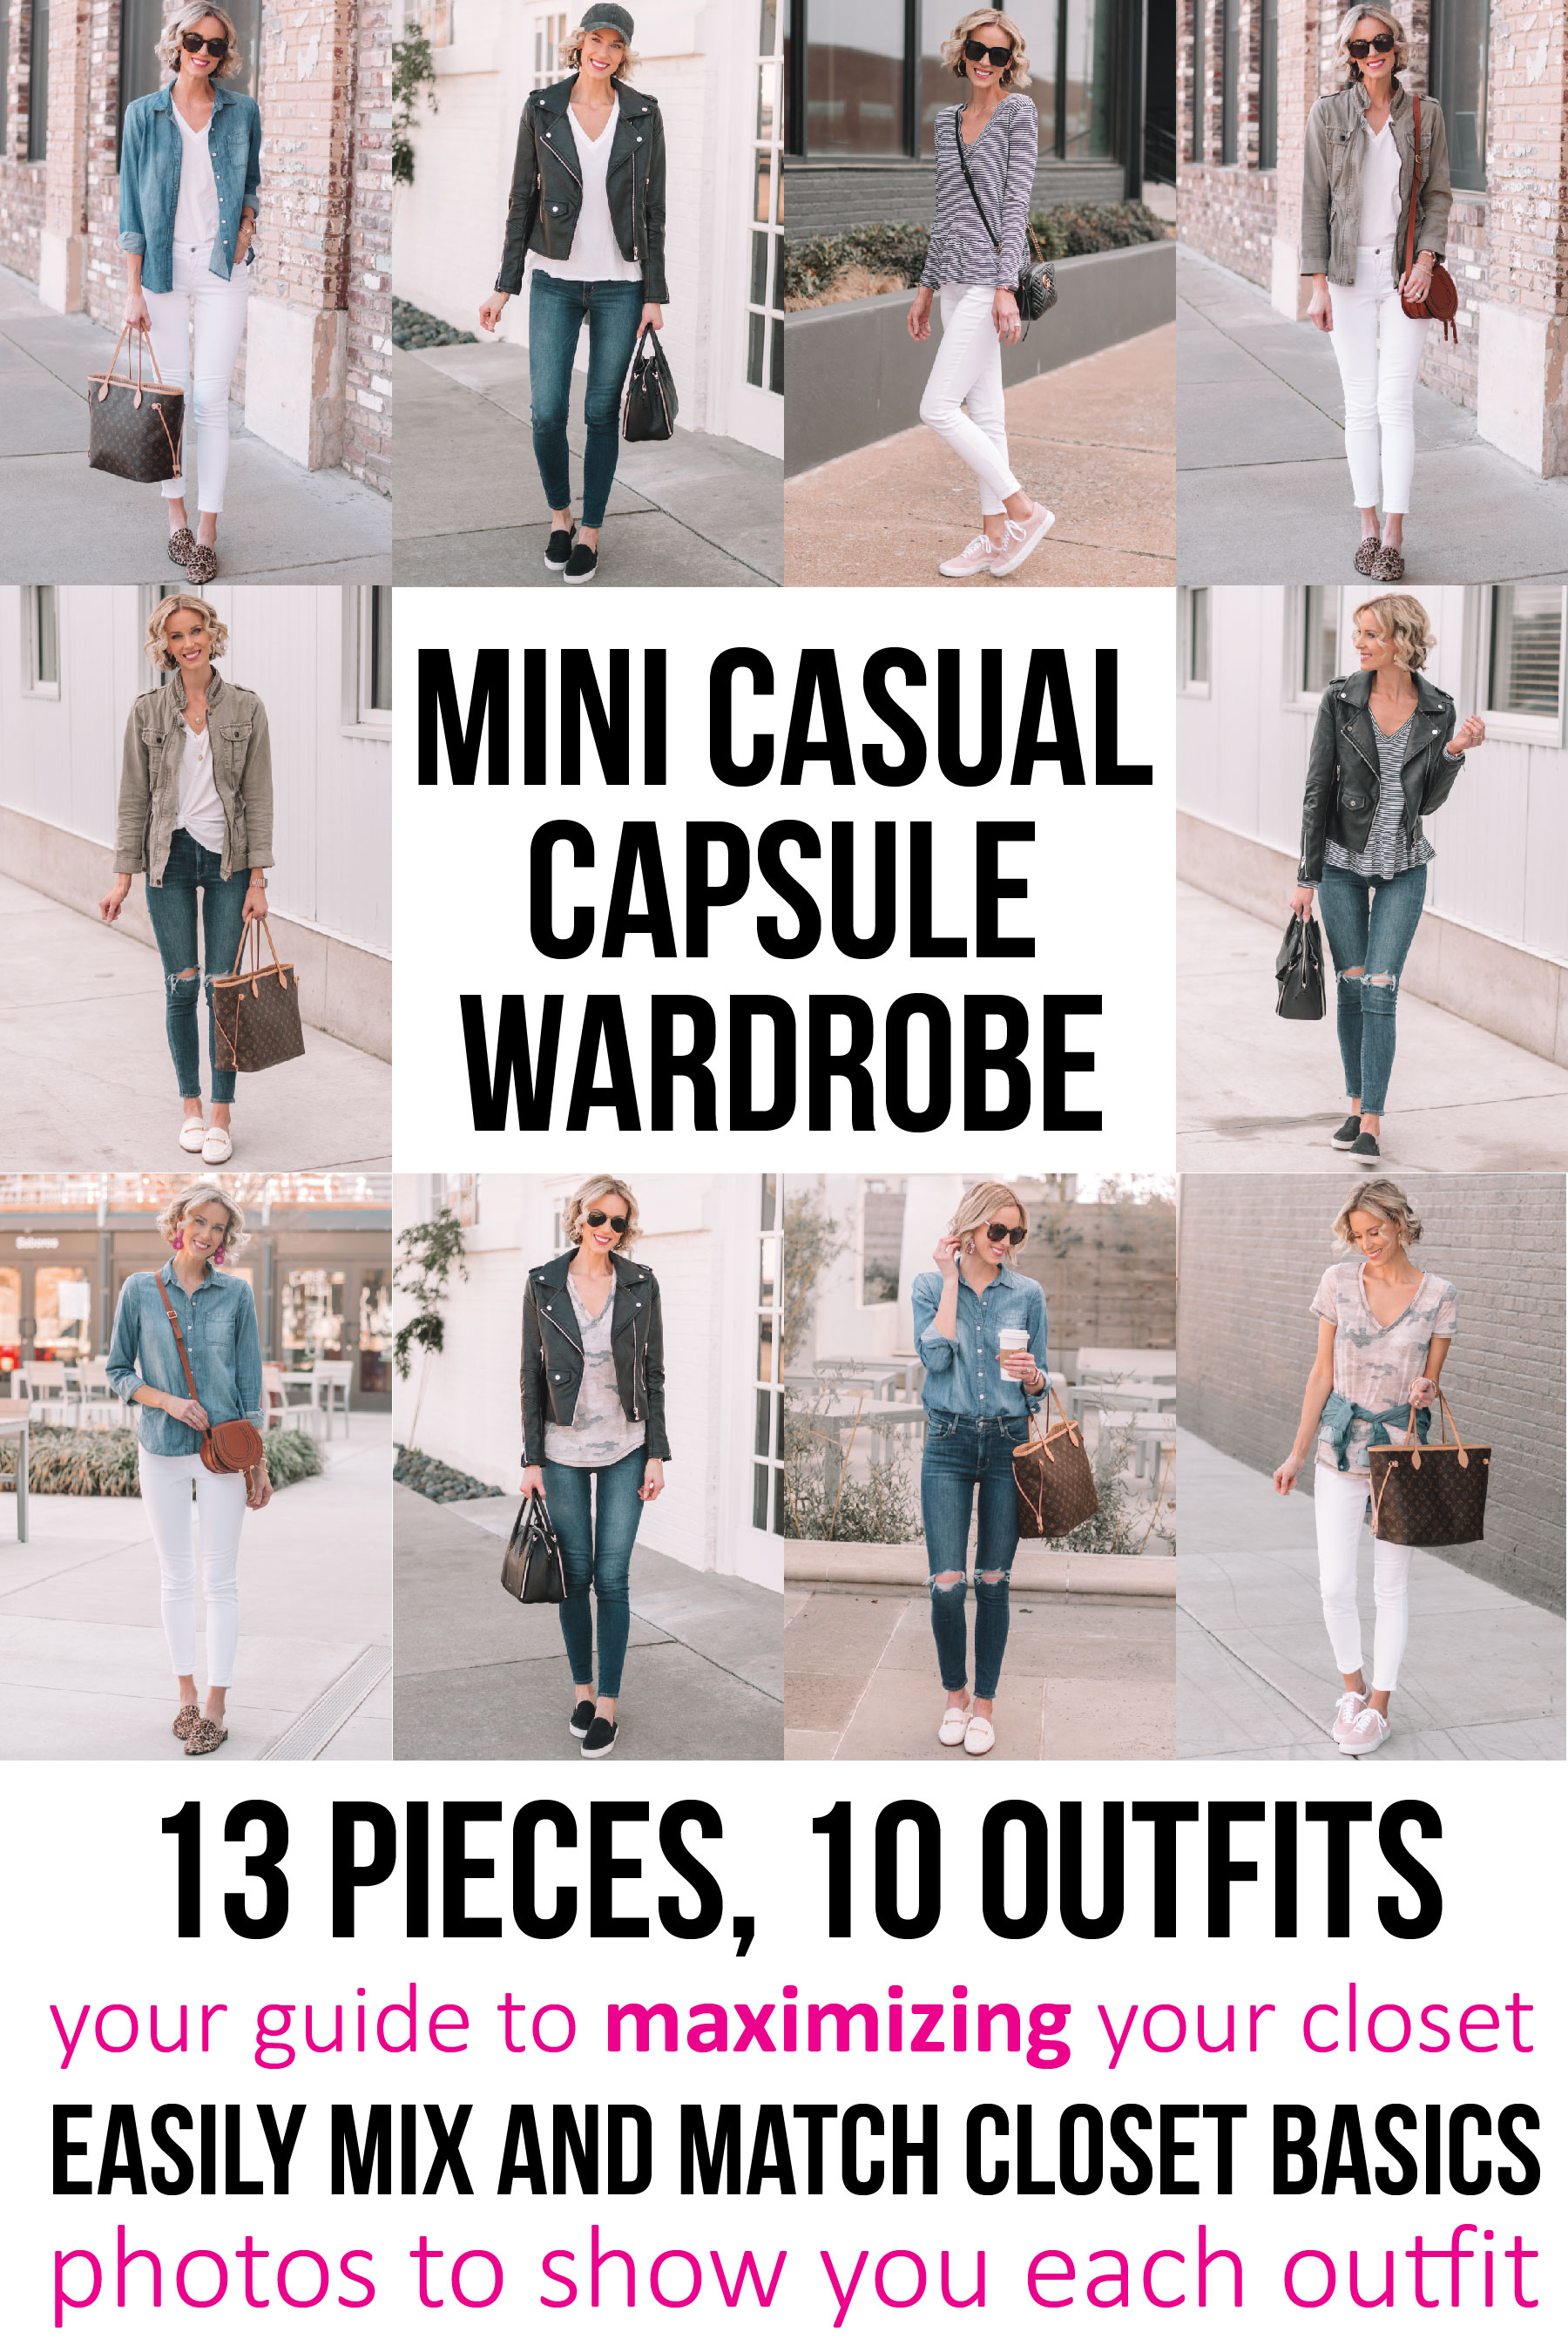 Mini Casual Capsule Wardrobe How to Mix and Match Your Closet - A